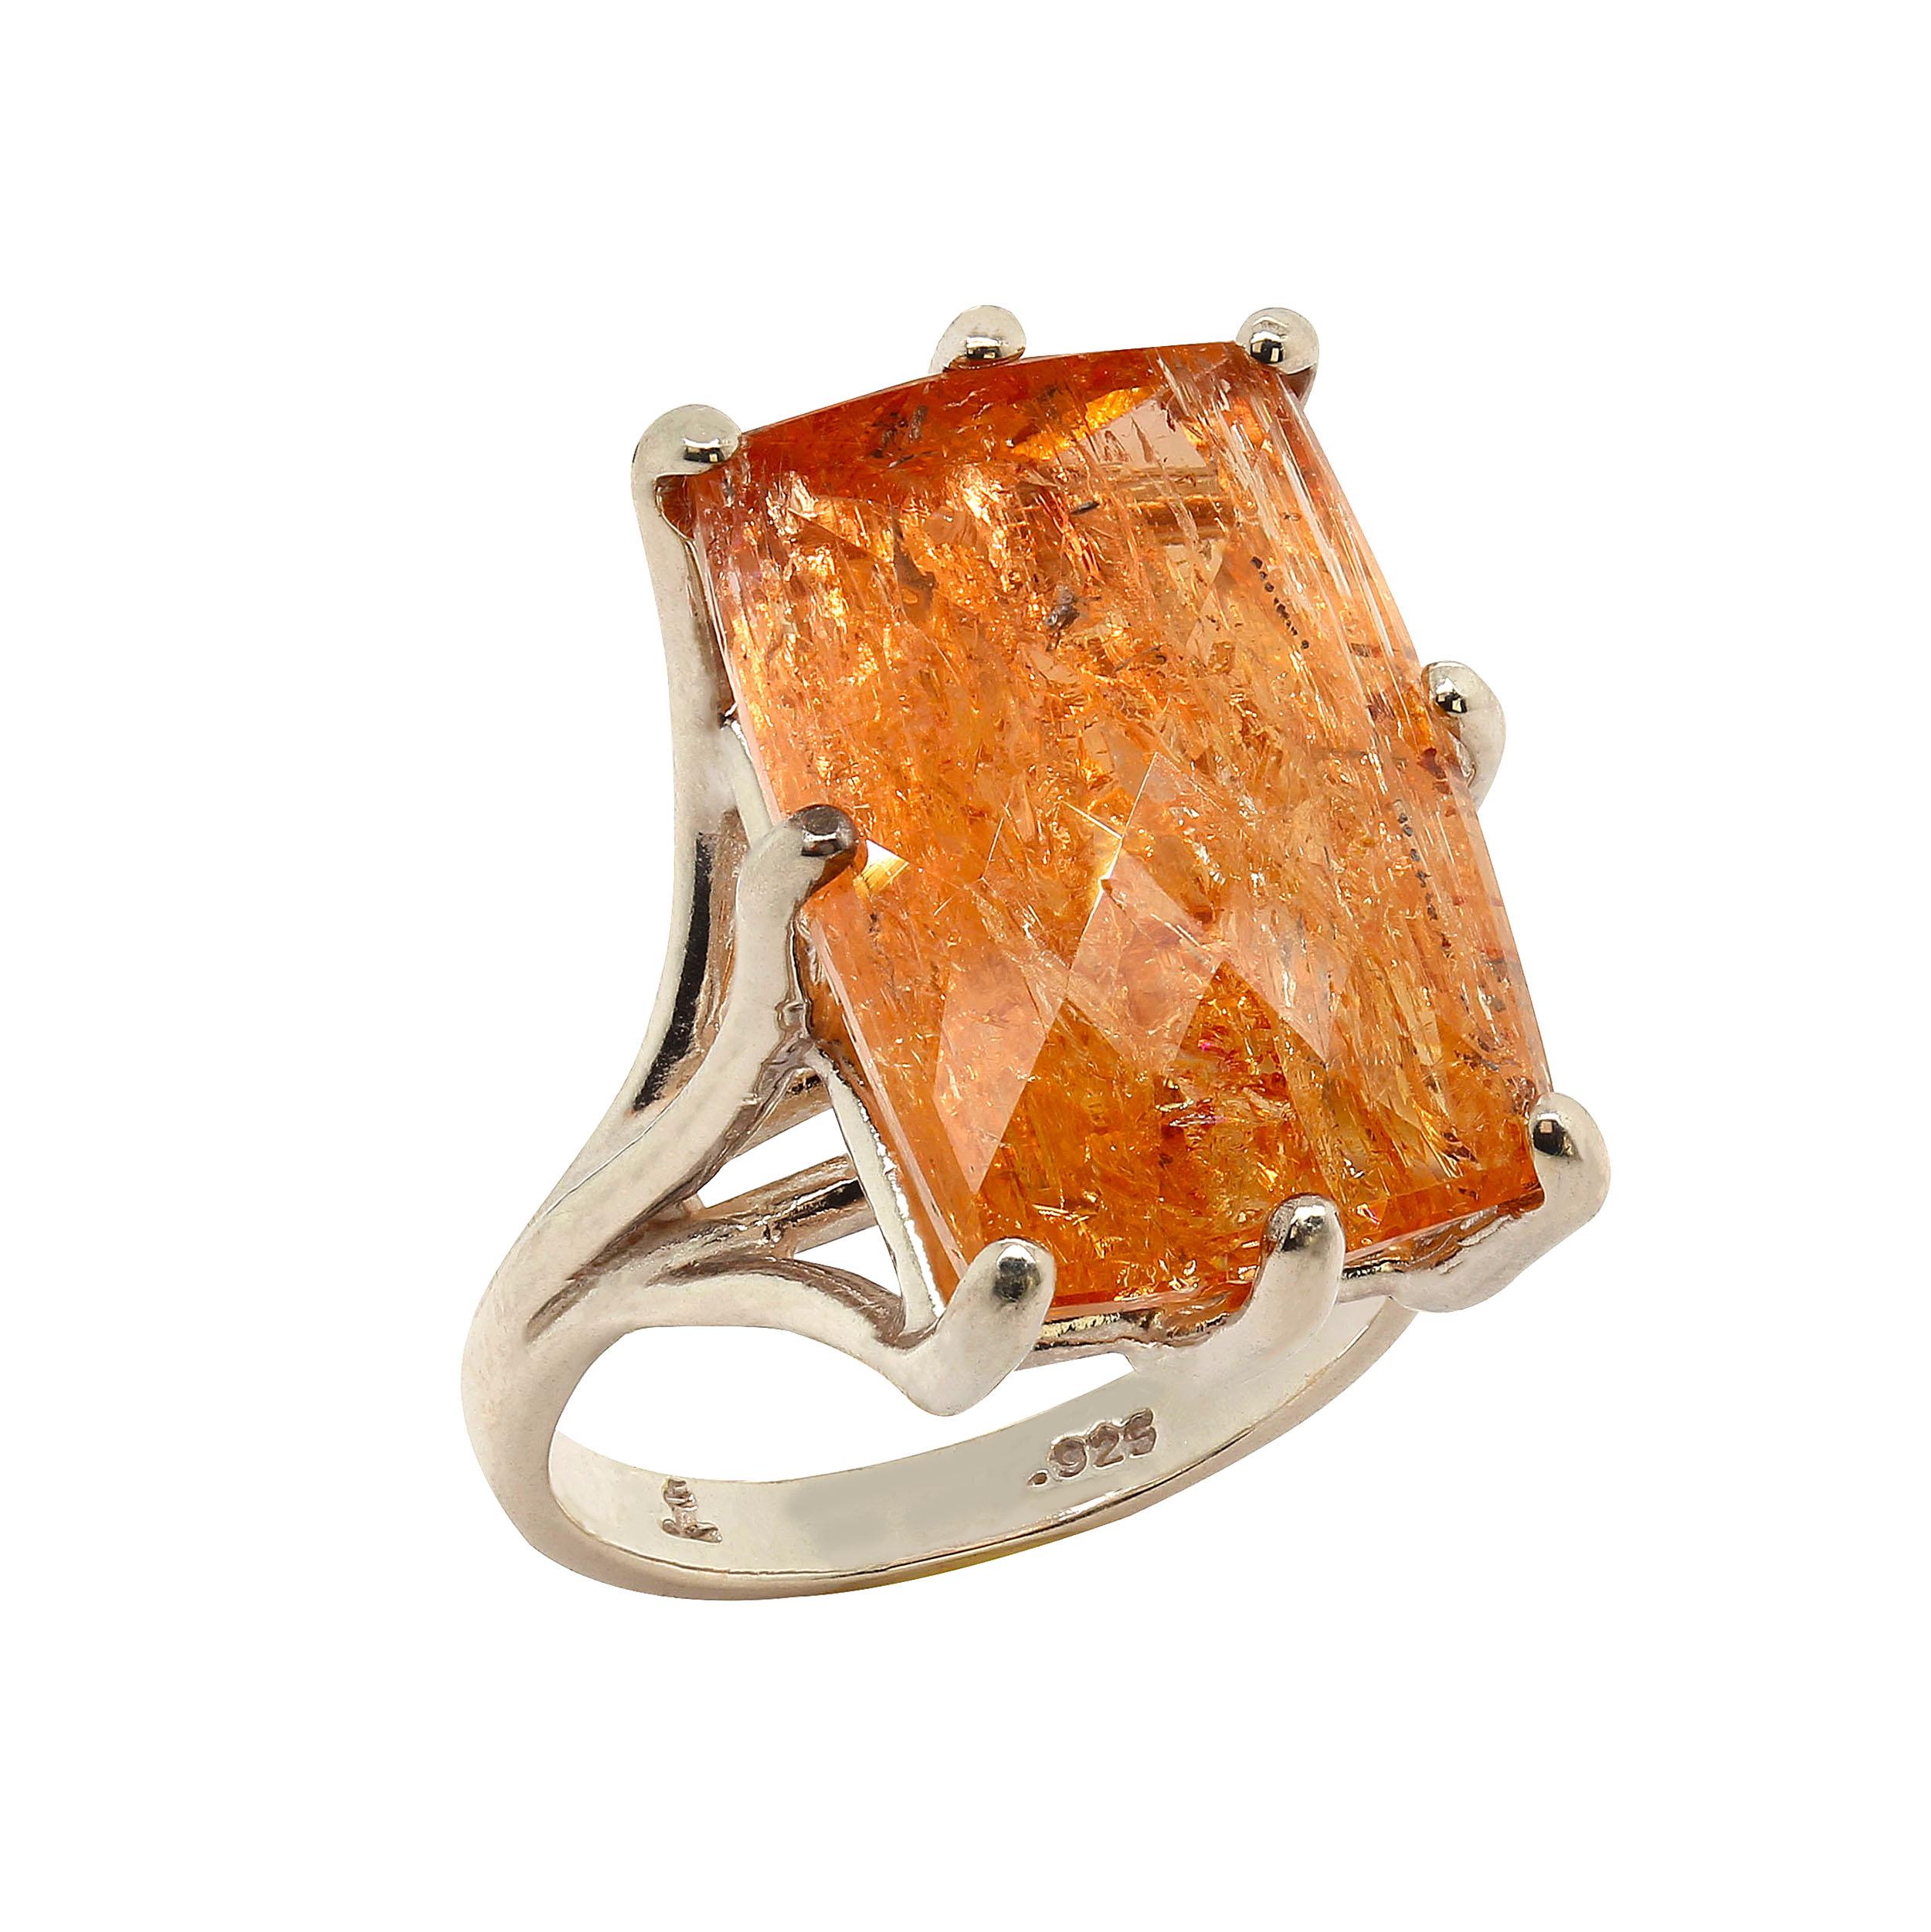 Sterling Silver Ring holding Rectangular Imperial Topaz with Checkerboard table.  This fabulous Imperial Topaz comes straight from Ouro Preto, Minas Gerais, Brasil.  It is a generous 19 X 13 MM, approximately 22 carats,  and sits fairly high off the